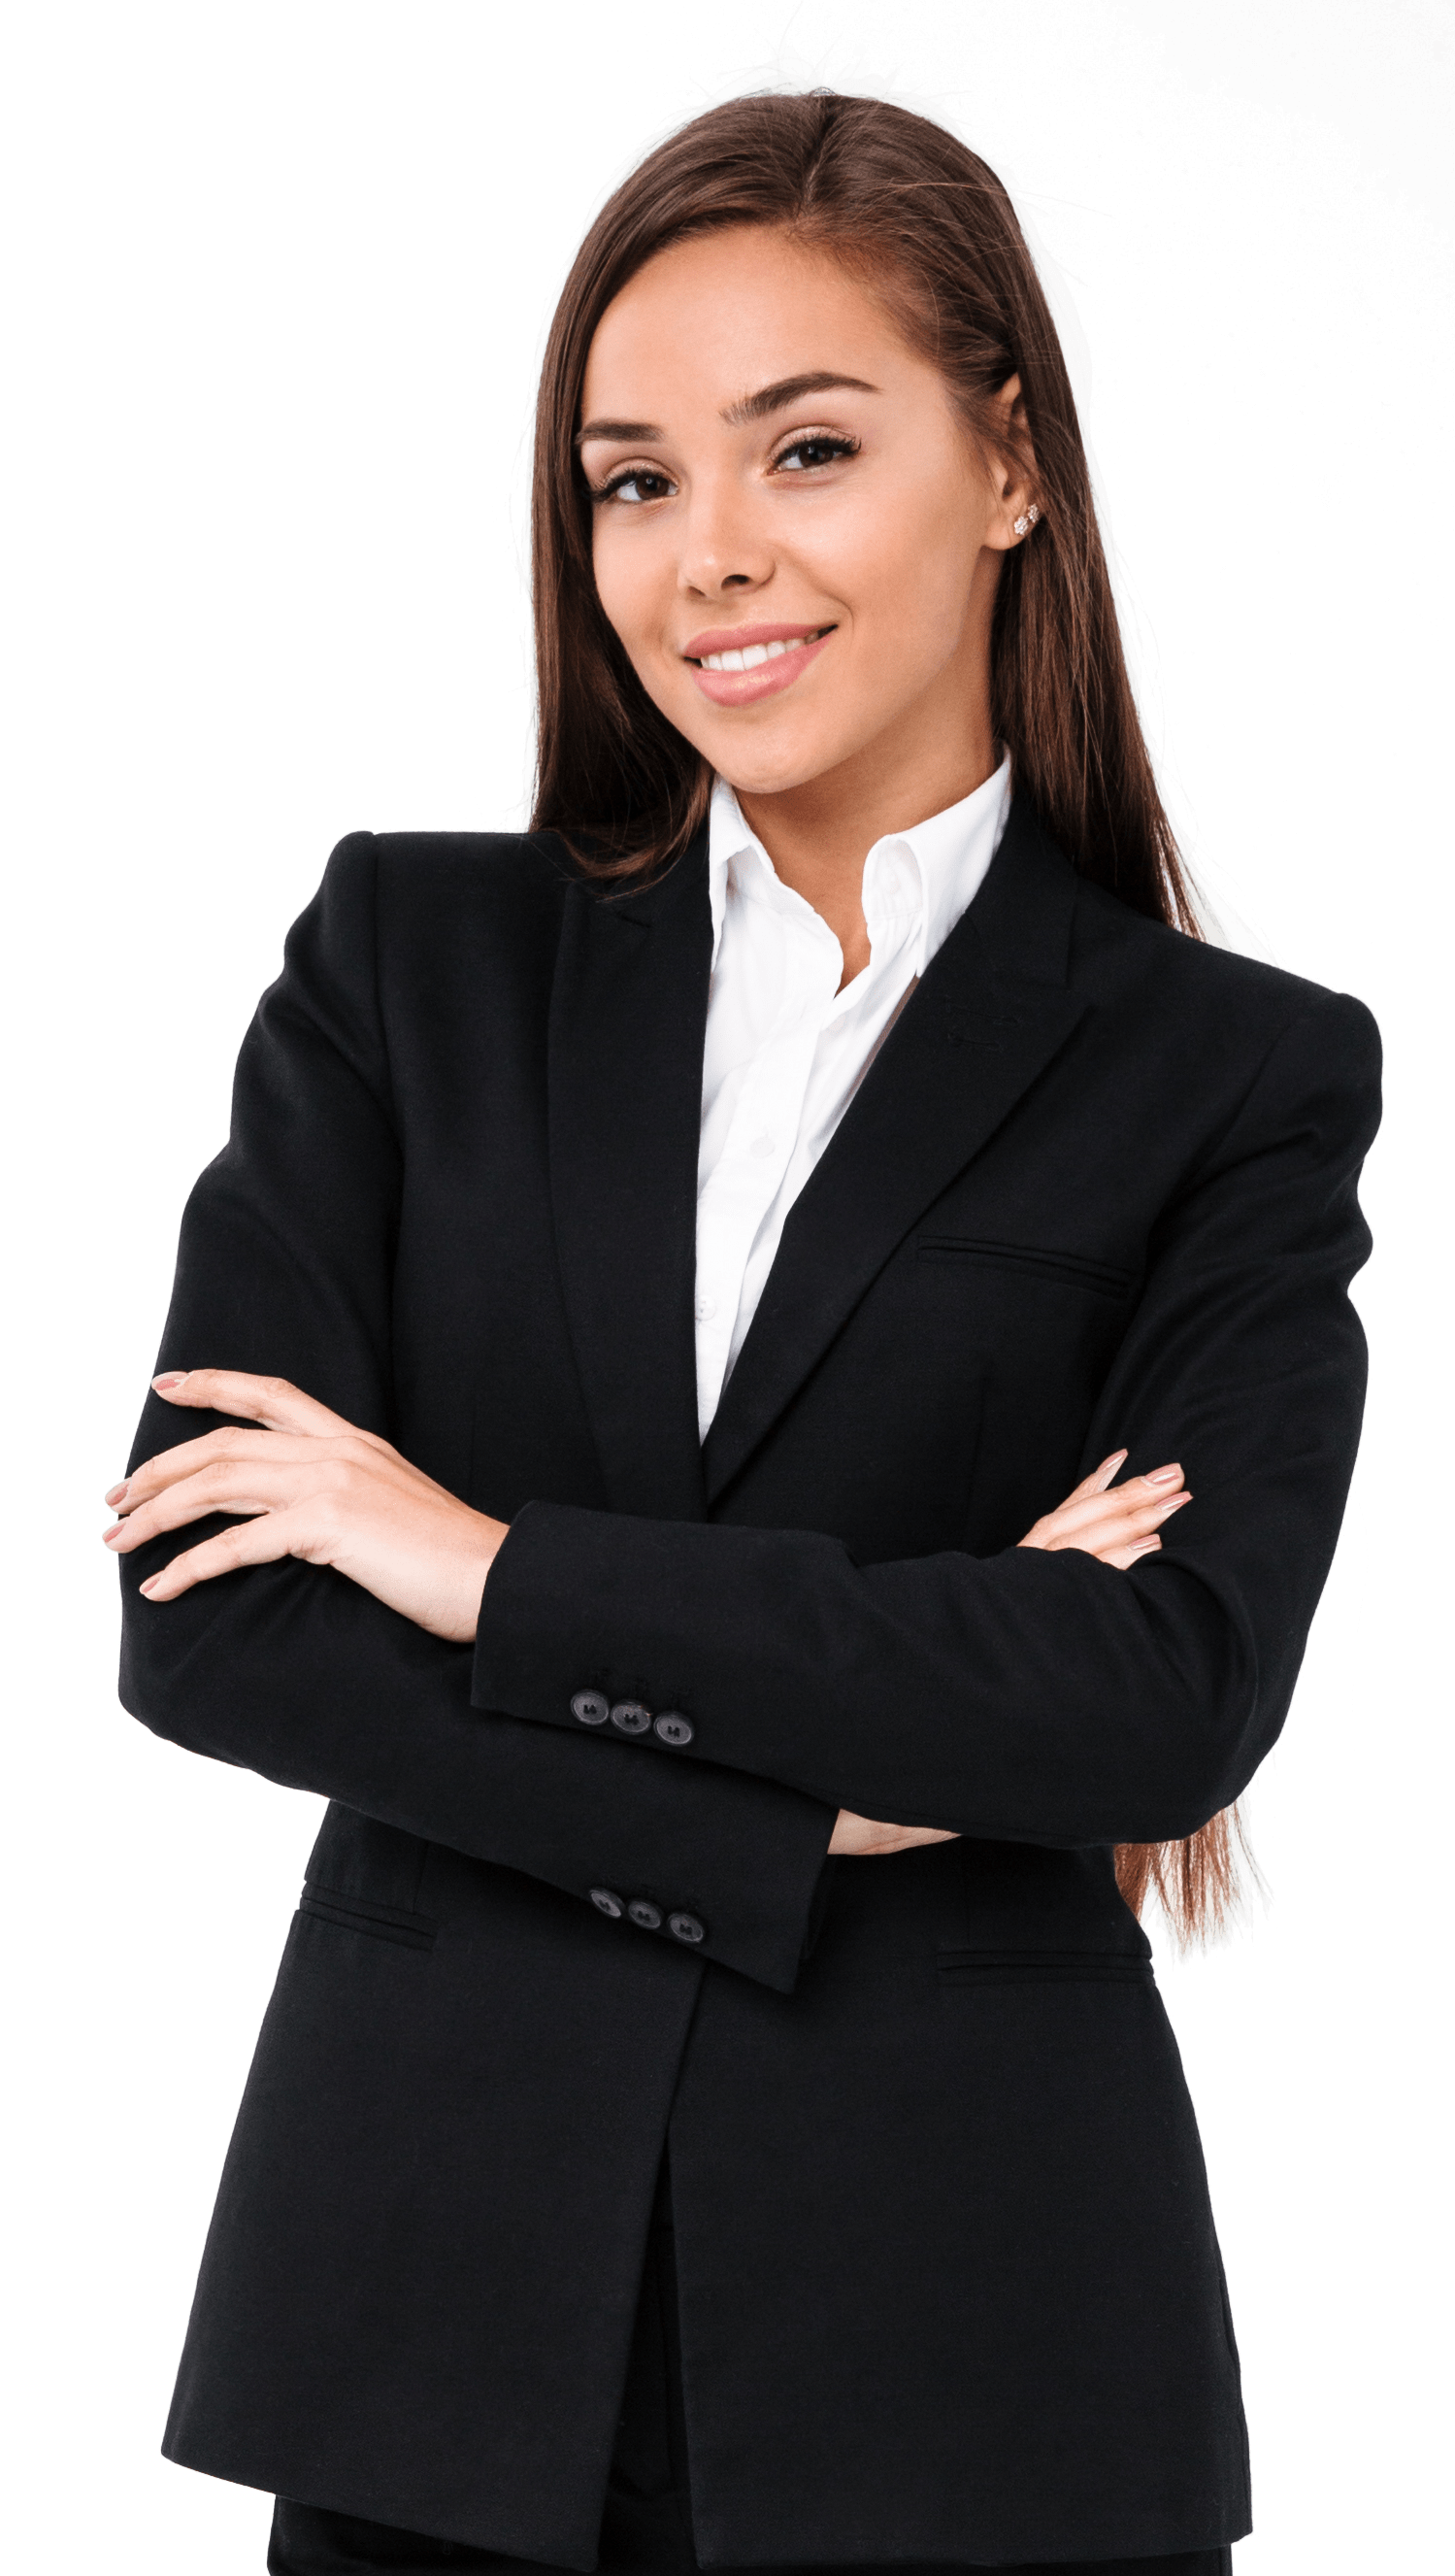 woman real estate agent in black suit